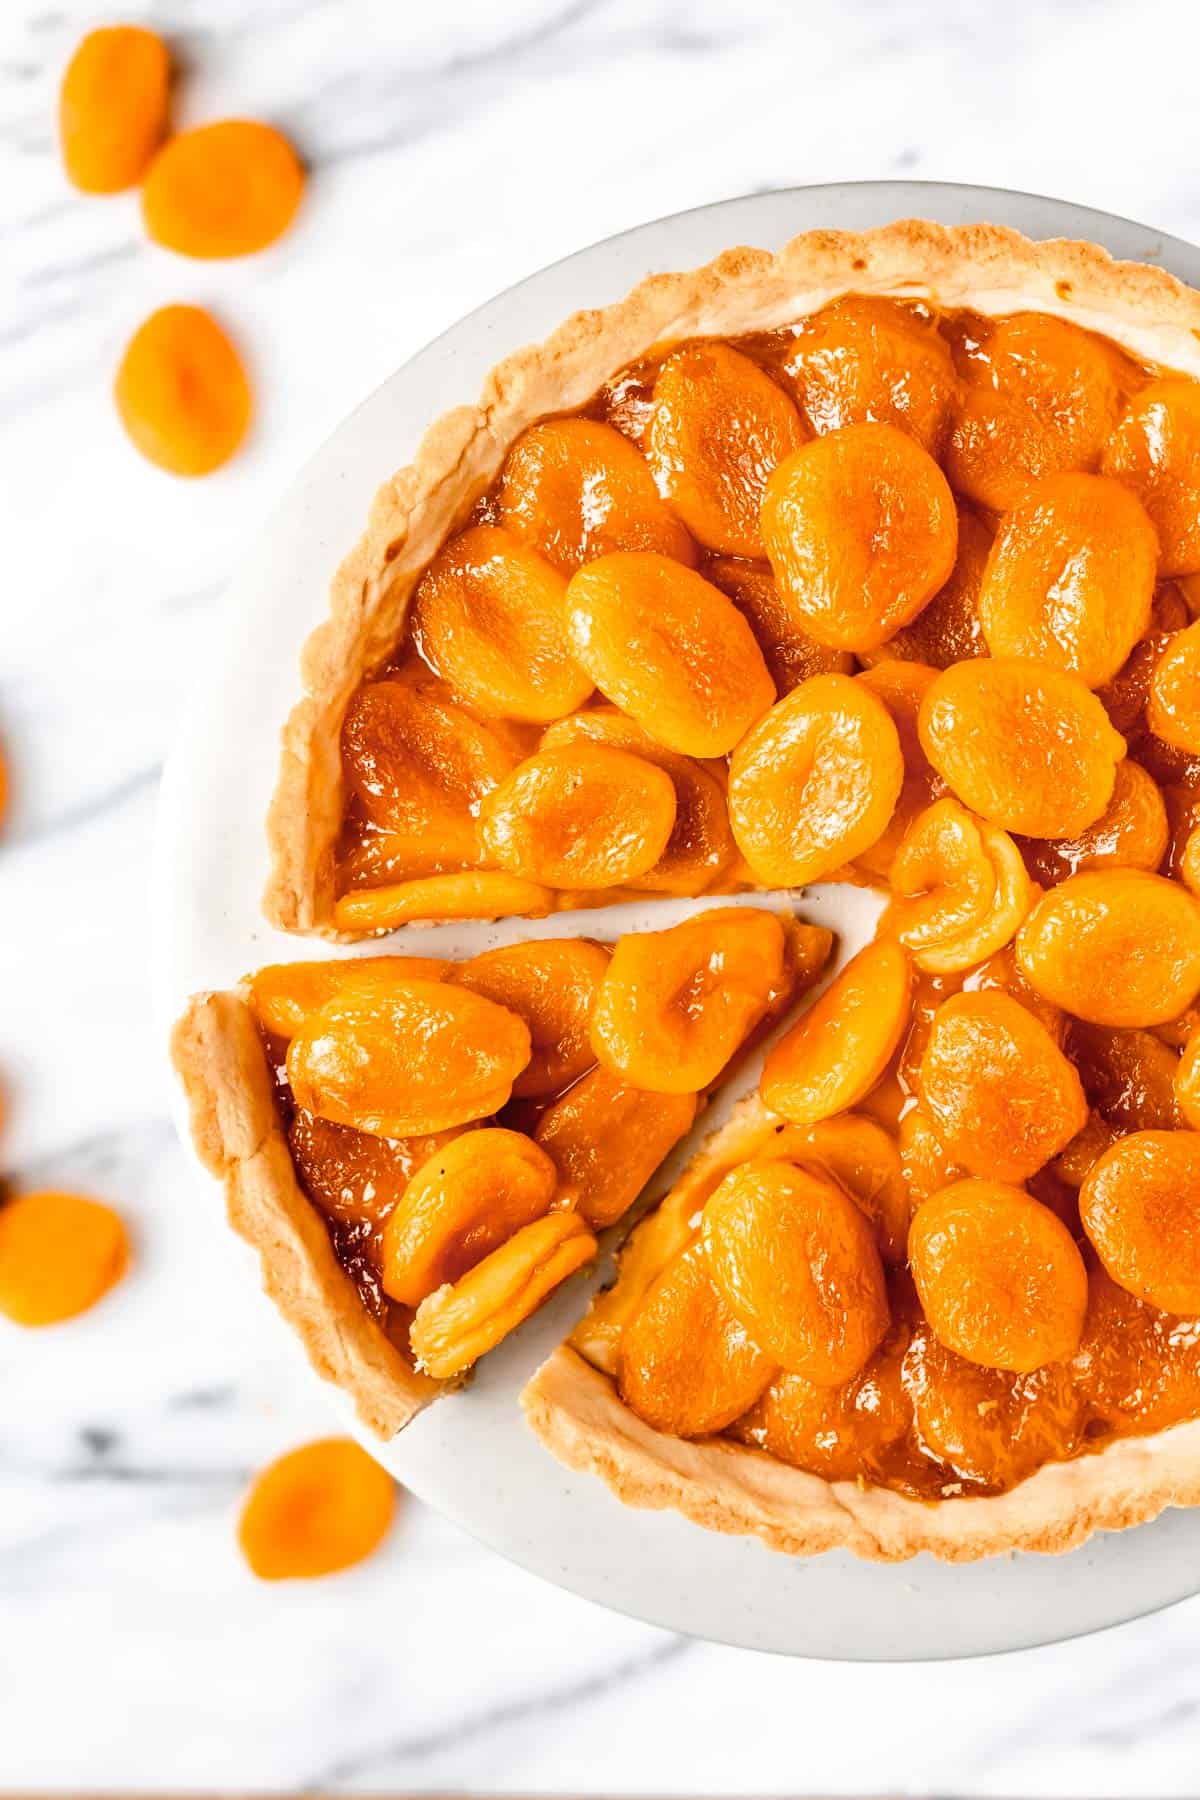 Overhead view of an apricot tart with one slice pulled away a little and apricots on the table around it.